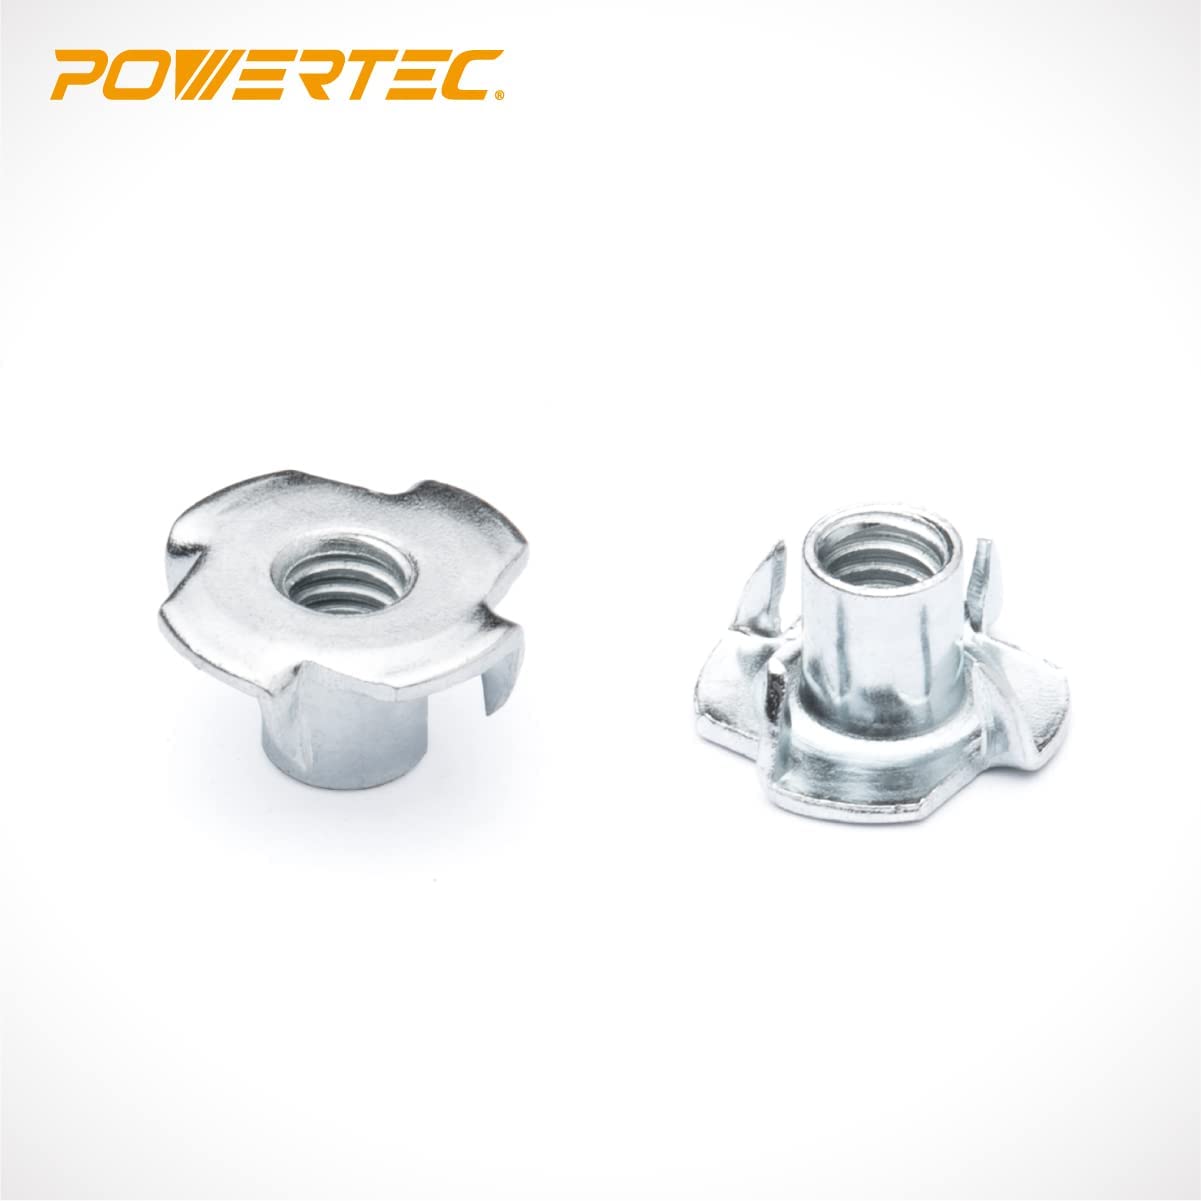 POWERTEC 50Pack Pronged Tee Nuts 1/4 inch - 20 by 7/16-inch (QTN1113) - image 3 of 5